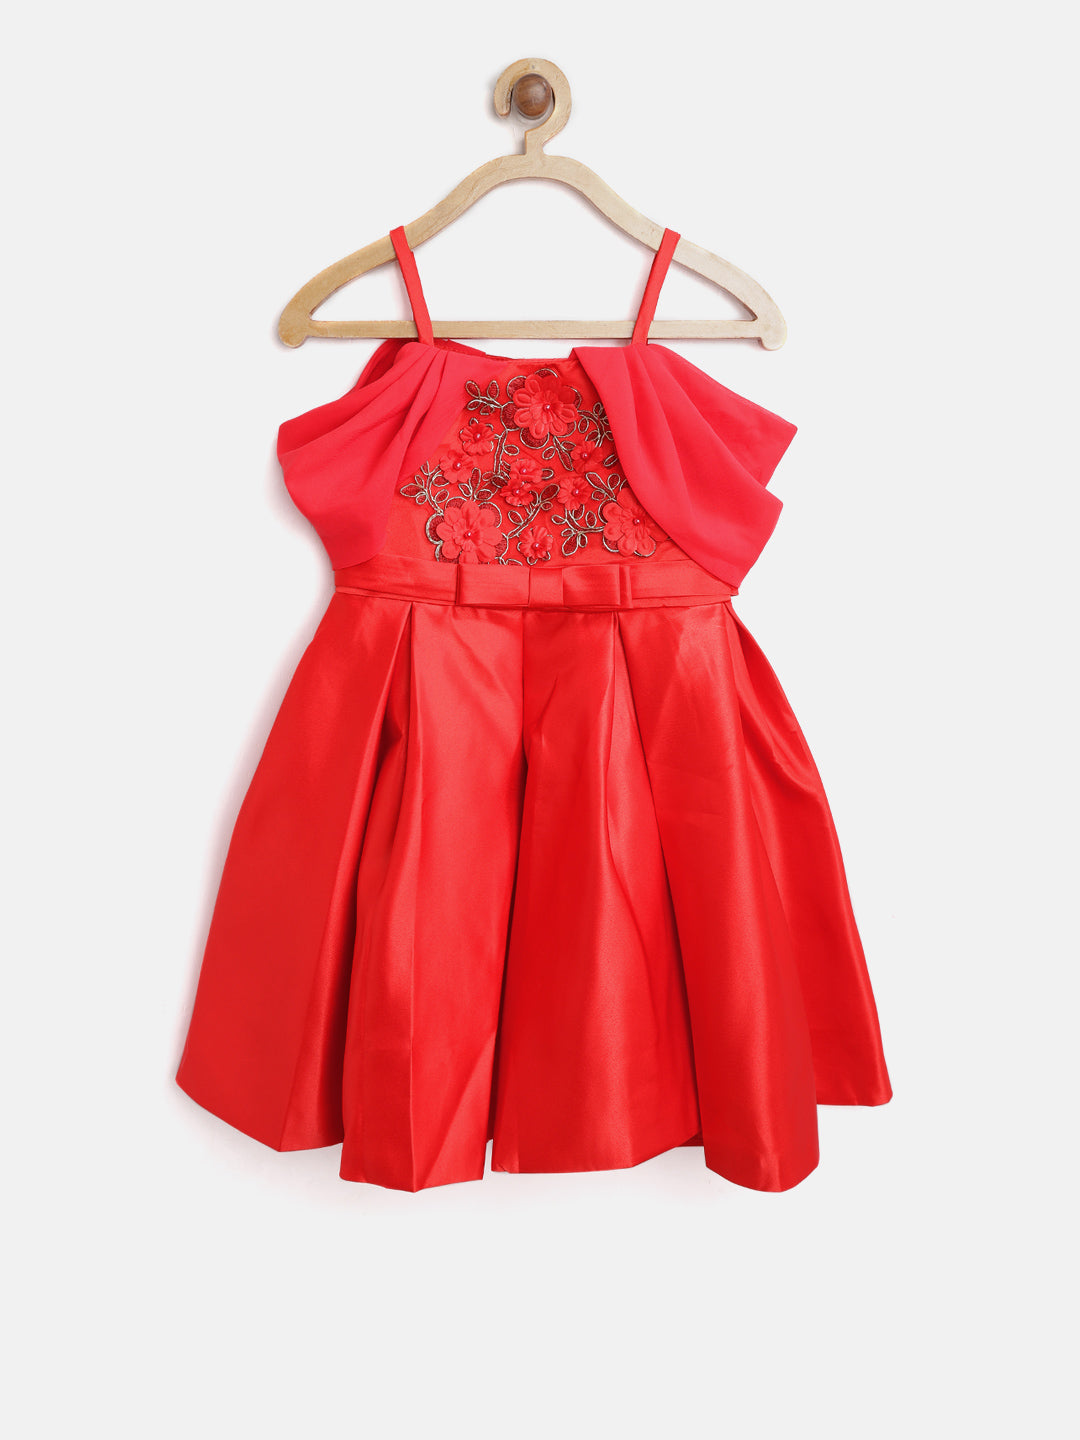 Gilr's Pink Pleated And Embellished Party Dress With Beautiful Back Bow - StyleStone Kid